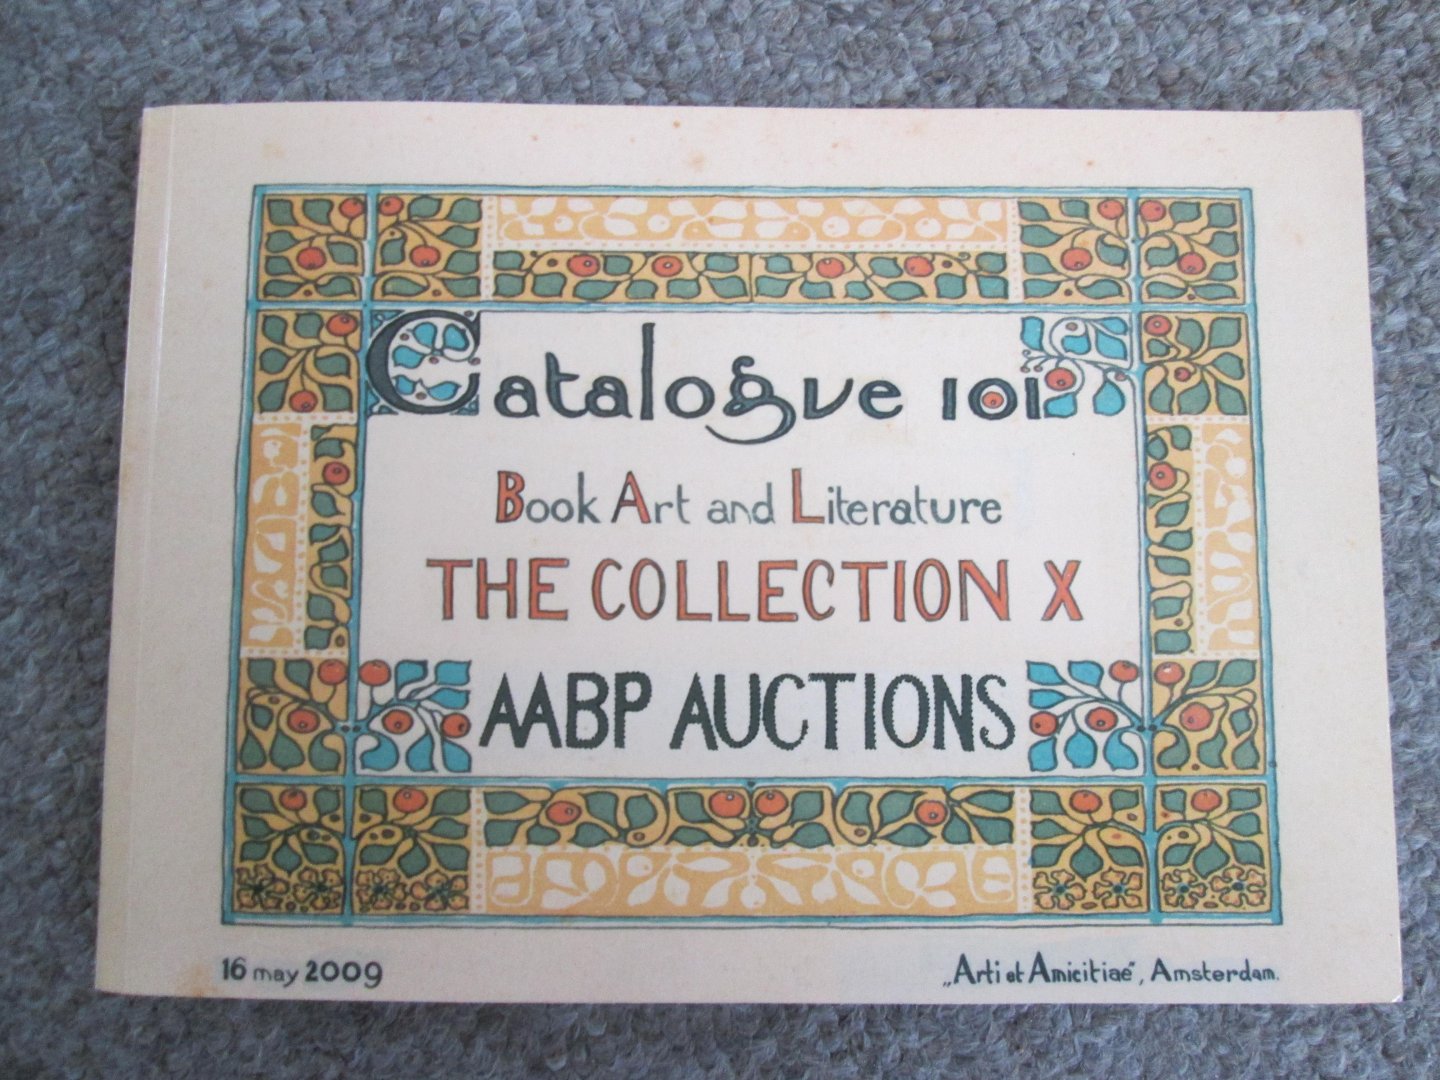 catalogus v. boekenveiling ; catalogue 101 ; BOOK ART AND LITERATURE / THE COLLECTION X - AUCTION SALE OF BOOKS AND PRINTS - May 16 , 2009 ( Arti & Amicitiae Rokin 112  Amsterdam )